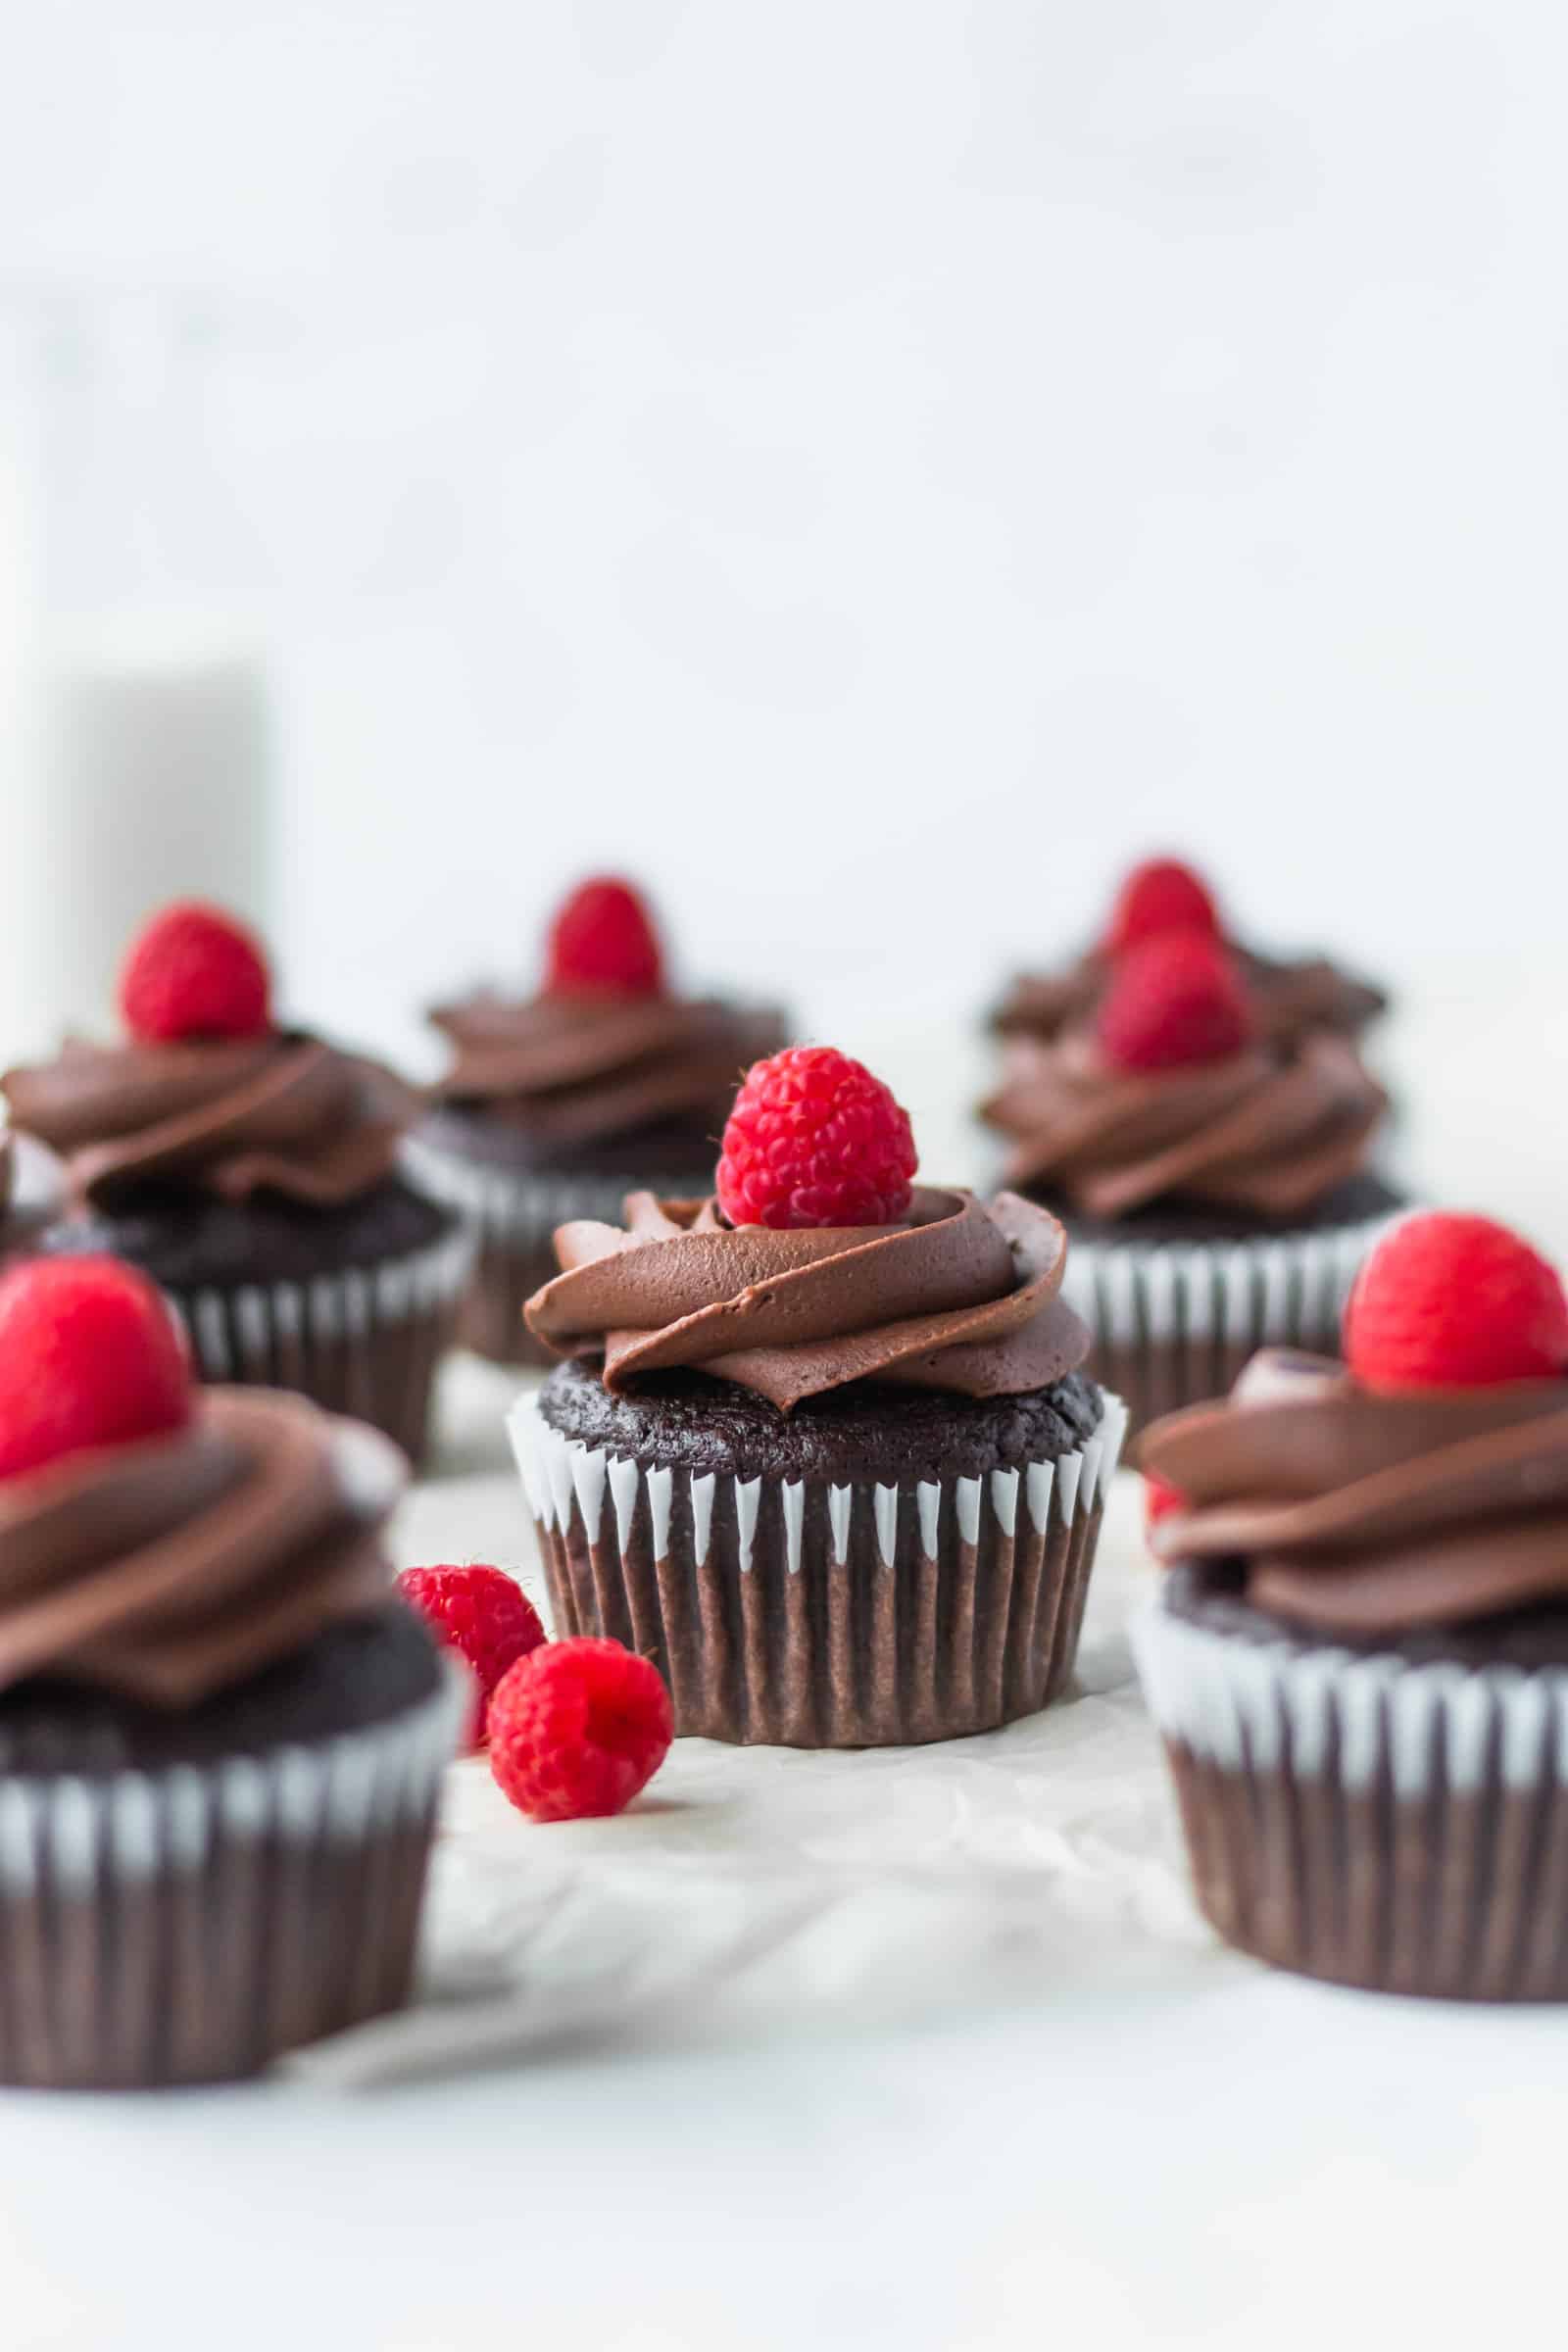 These vegan chocolate banana cupcakes are delicious and moist! Topped with creamy vegan chocolate buttercream and fresh raspberries! #chocolatecupcakes #bananacupcakes #valentinesdaydessert #veganvalentinesday #vegancupcakes